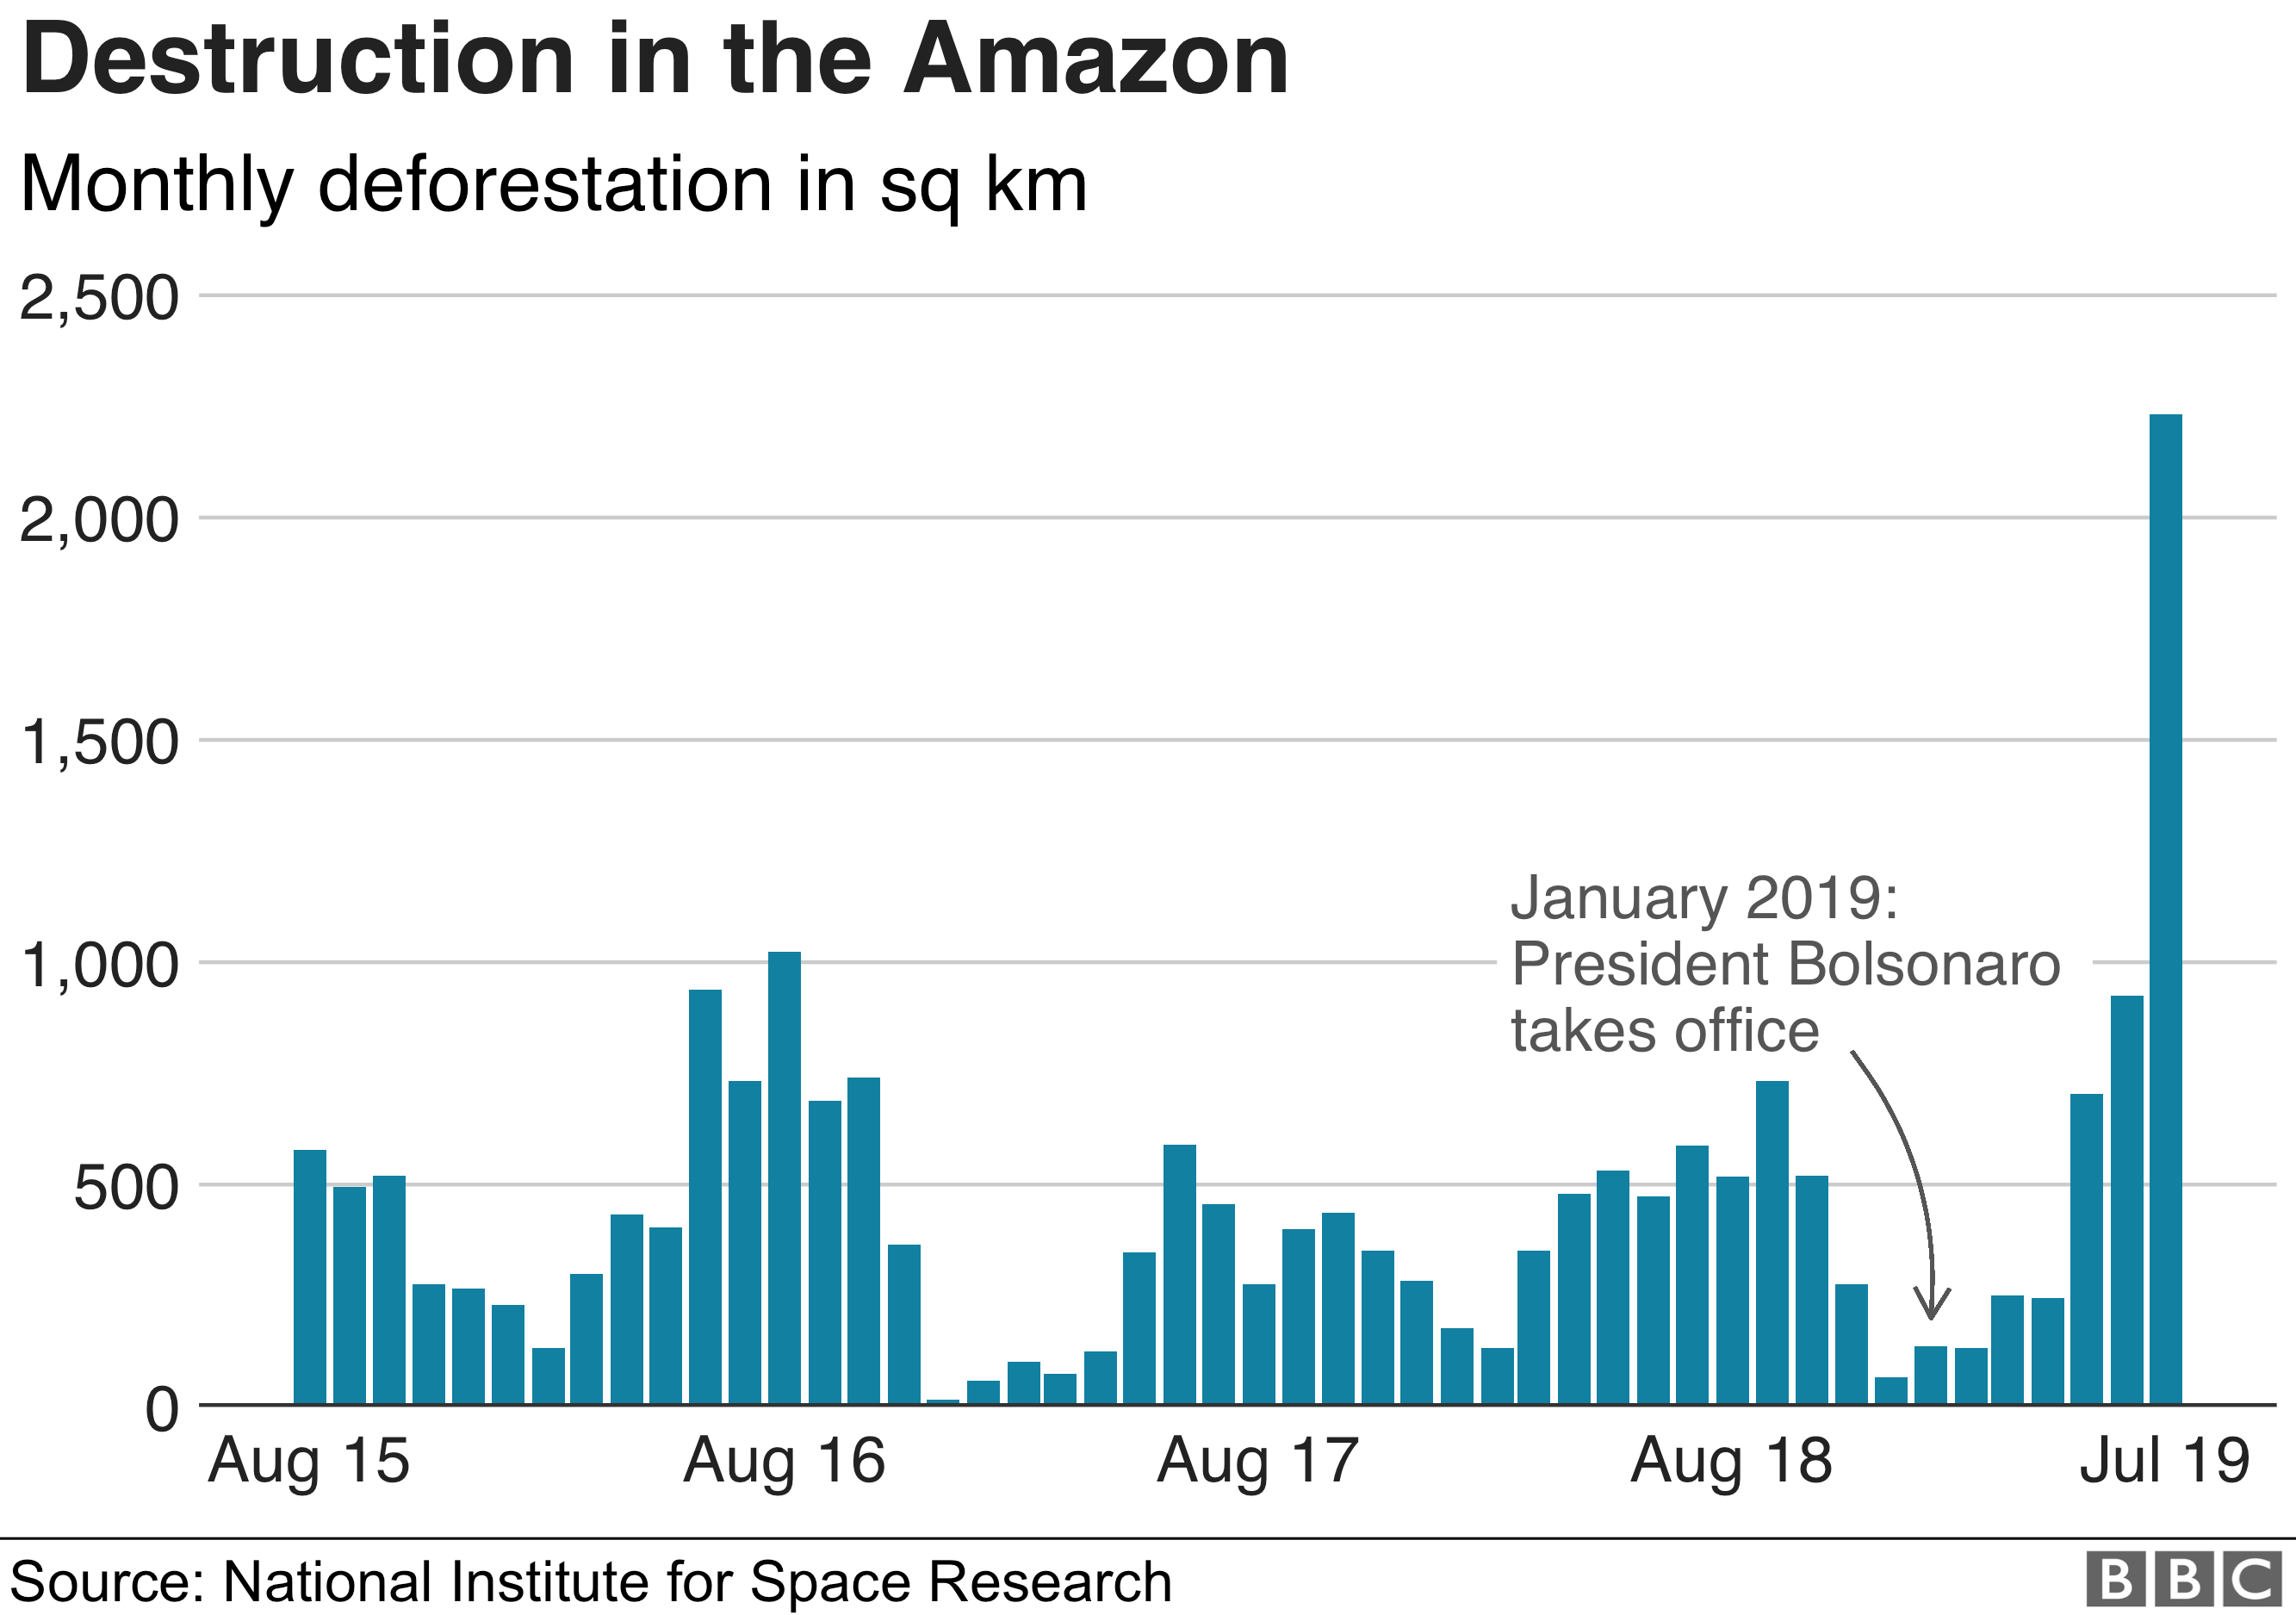 Chart showing monthly deforestation in the Amazon region